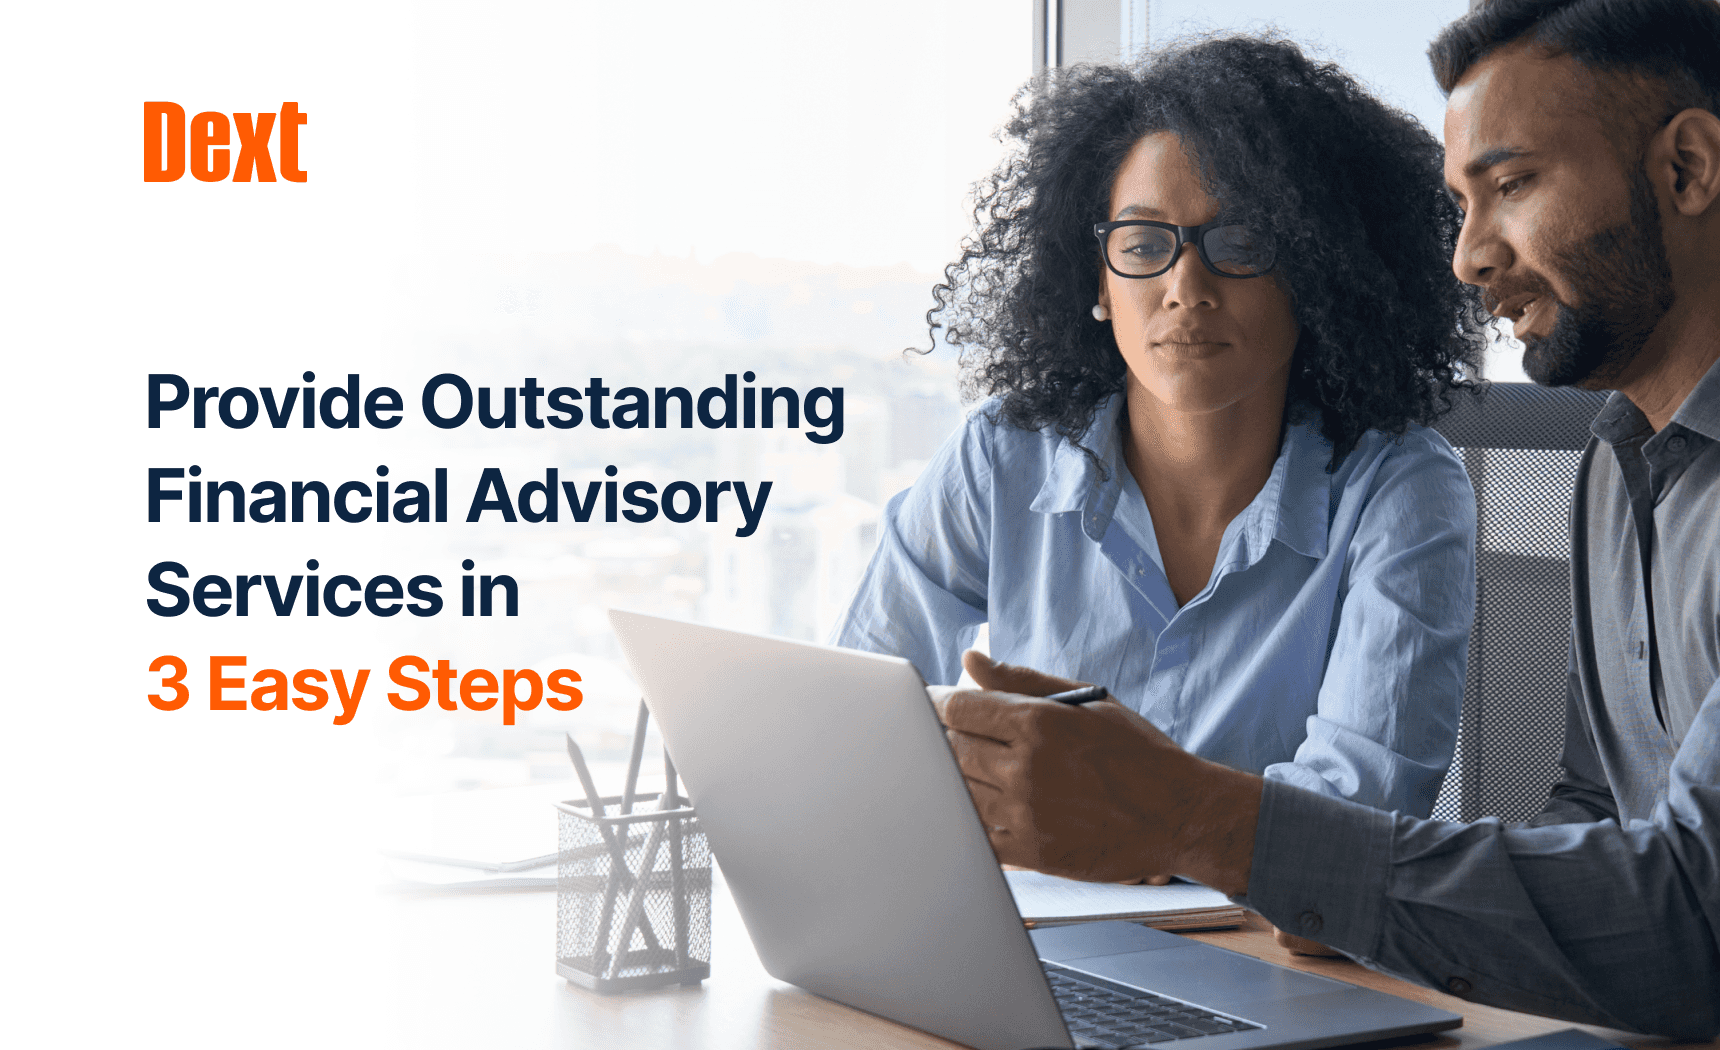 Provide Outstanding Financial Advisory Services in 3 Easy Steps